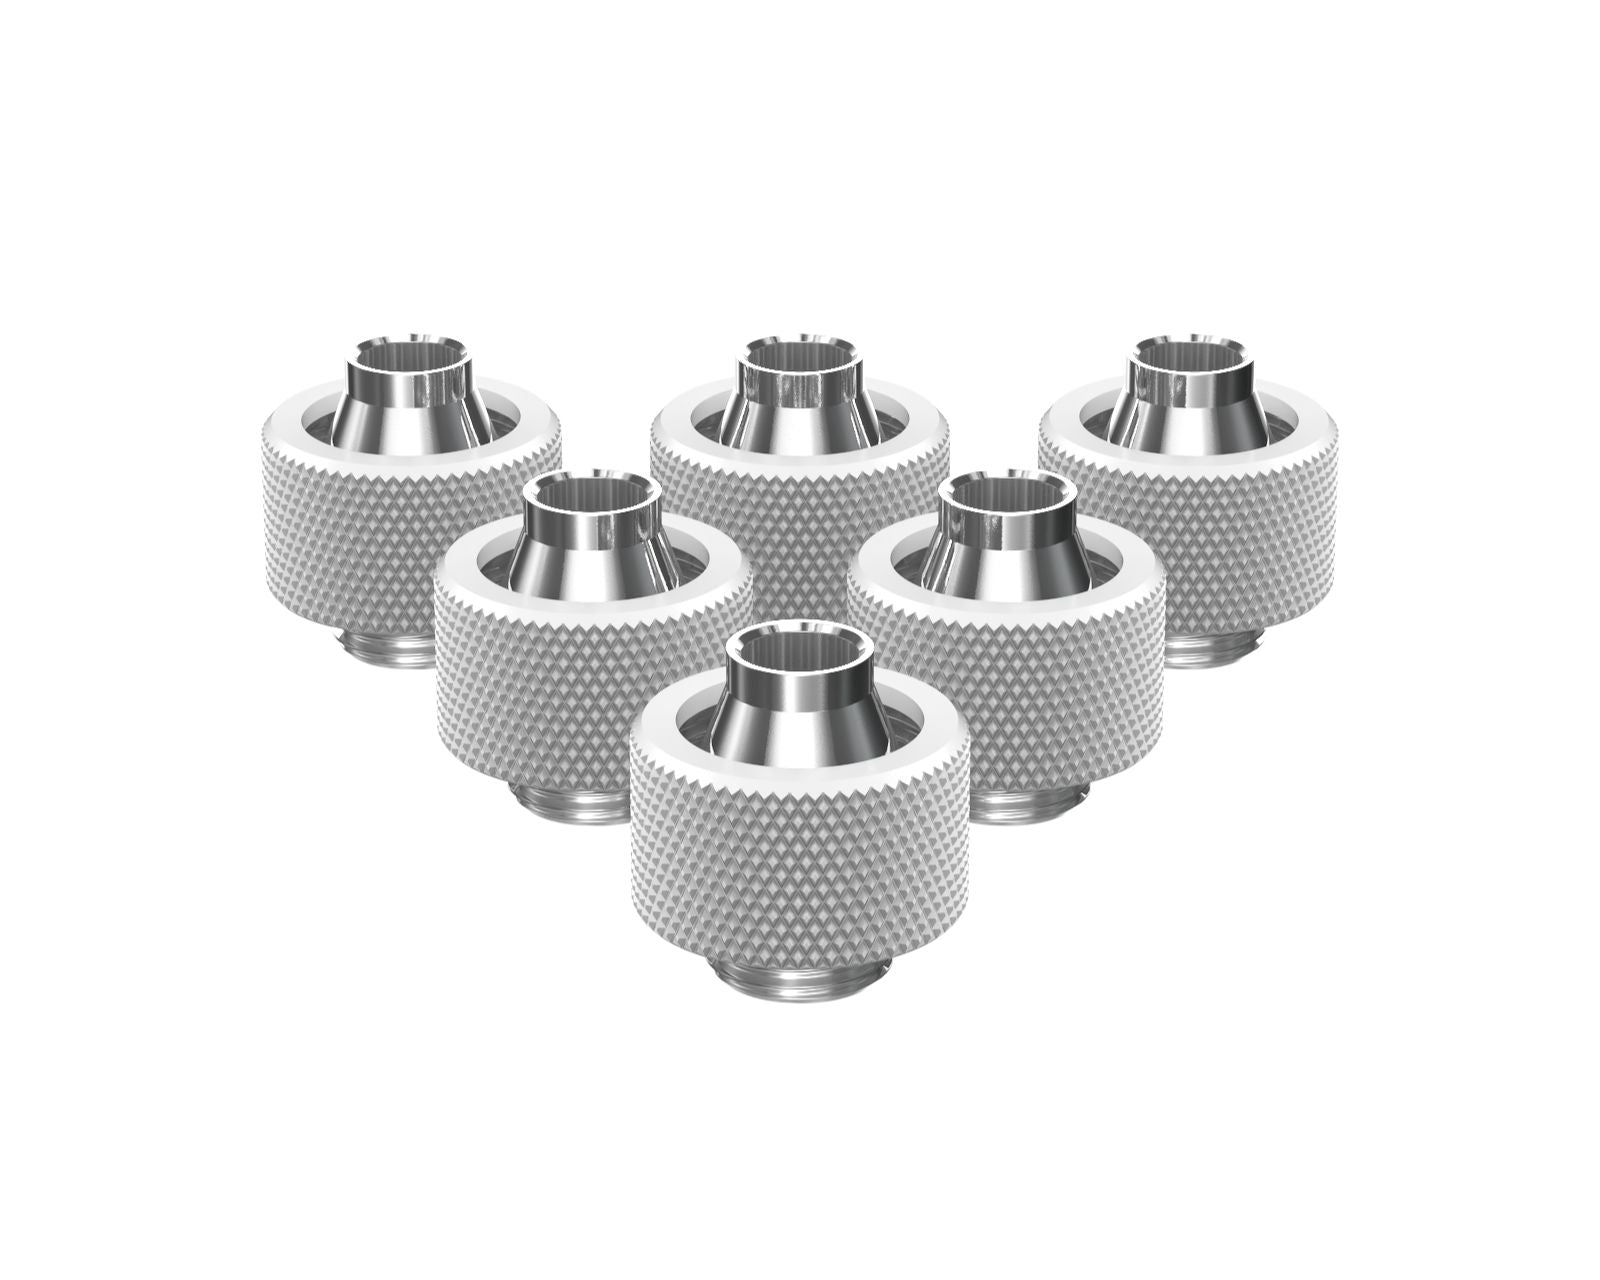 PrimoChill SecureFit SX - Premium Compression Fitting For 7/16in ID x 5/8in OD Flexible Tubing 6 Pack (F-SFSX758-6) - Available in 20+ Colors, Custom Watercooling Loop Ready - Sky White